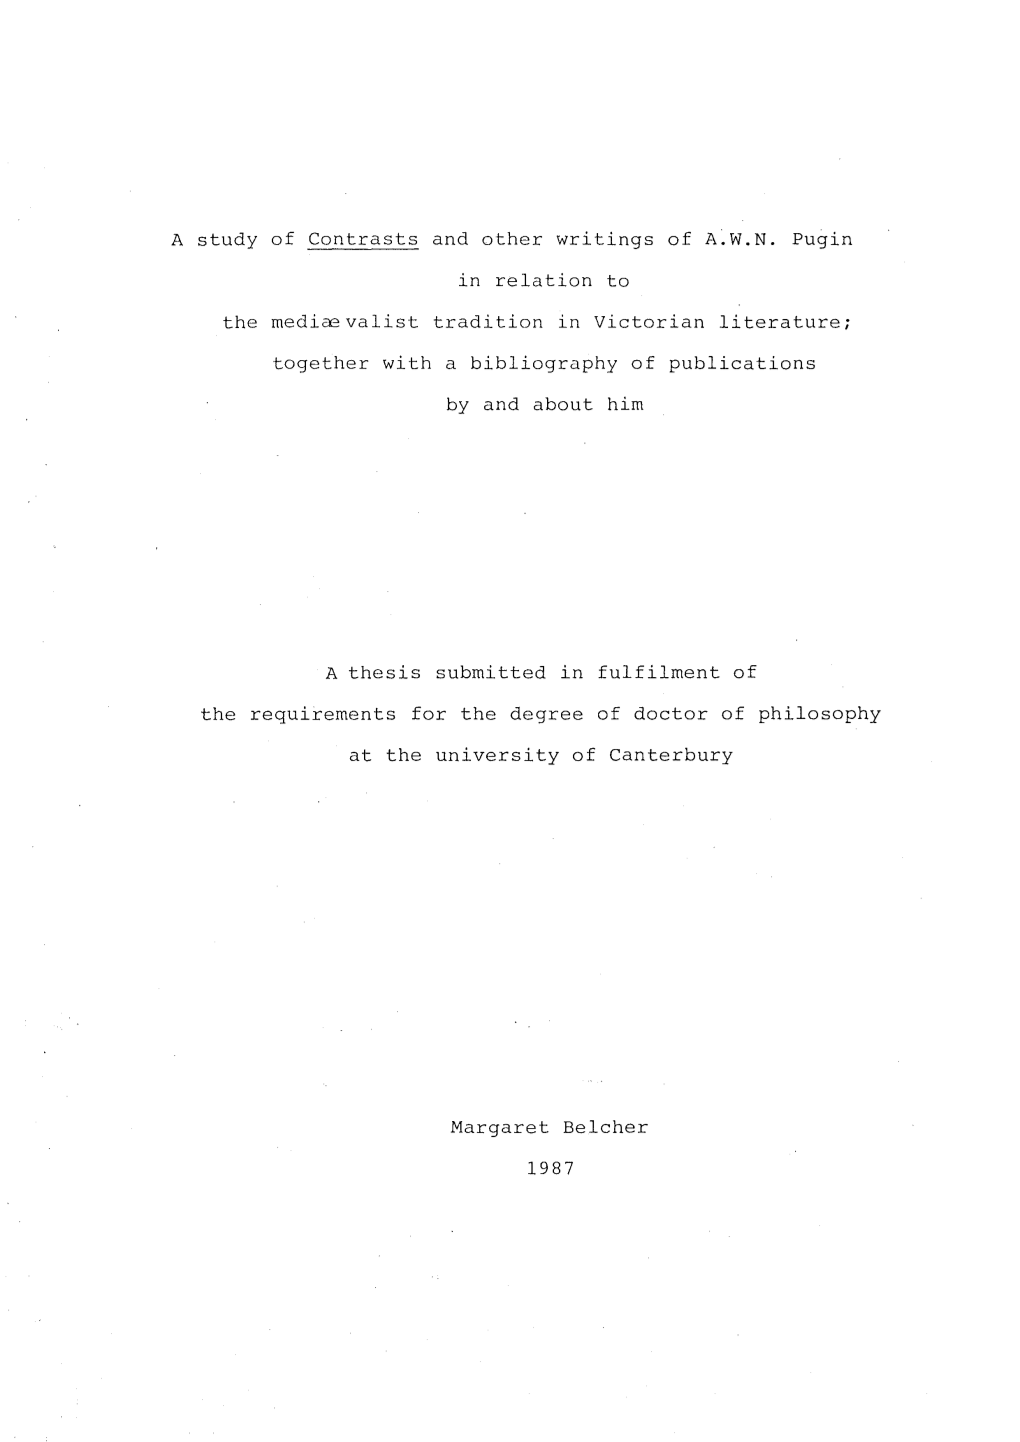 A Study of Contrasts and Other Writings of A.W.N. Pugin in Relation to The